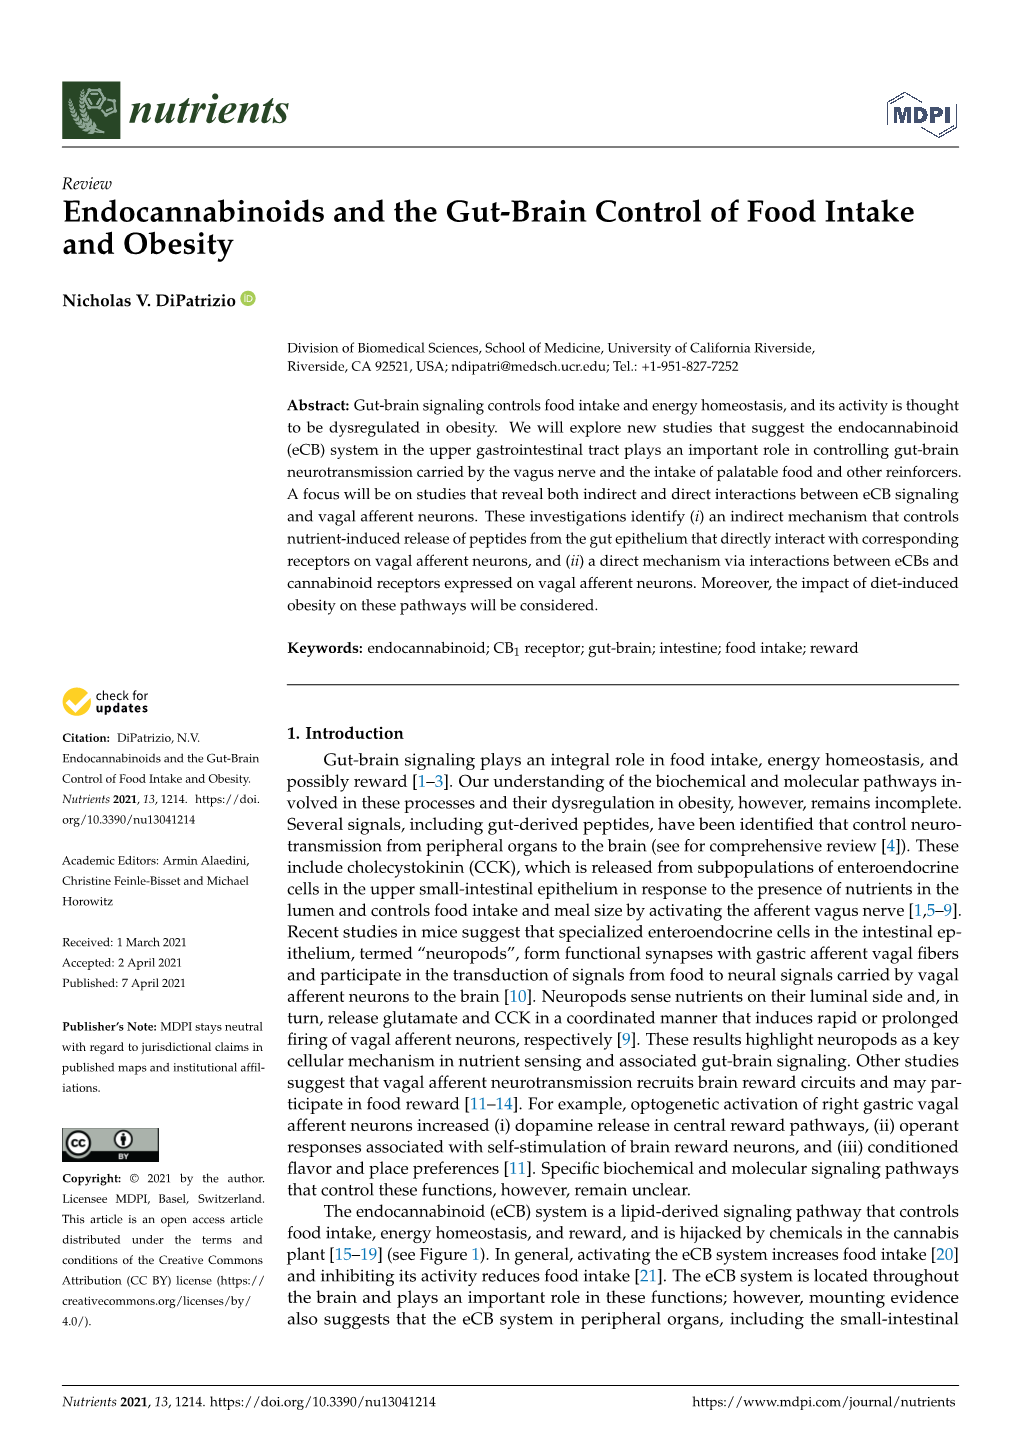 Endocannabinoids and the Gut-Brain Control of Food Intake and Obesity